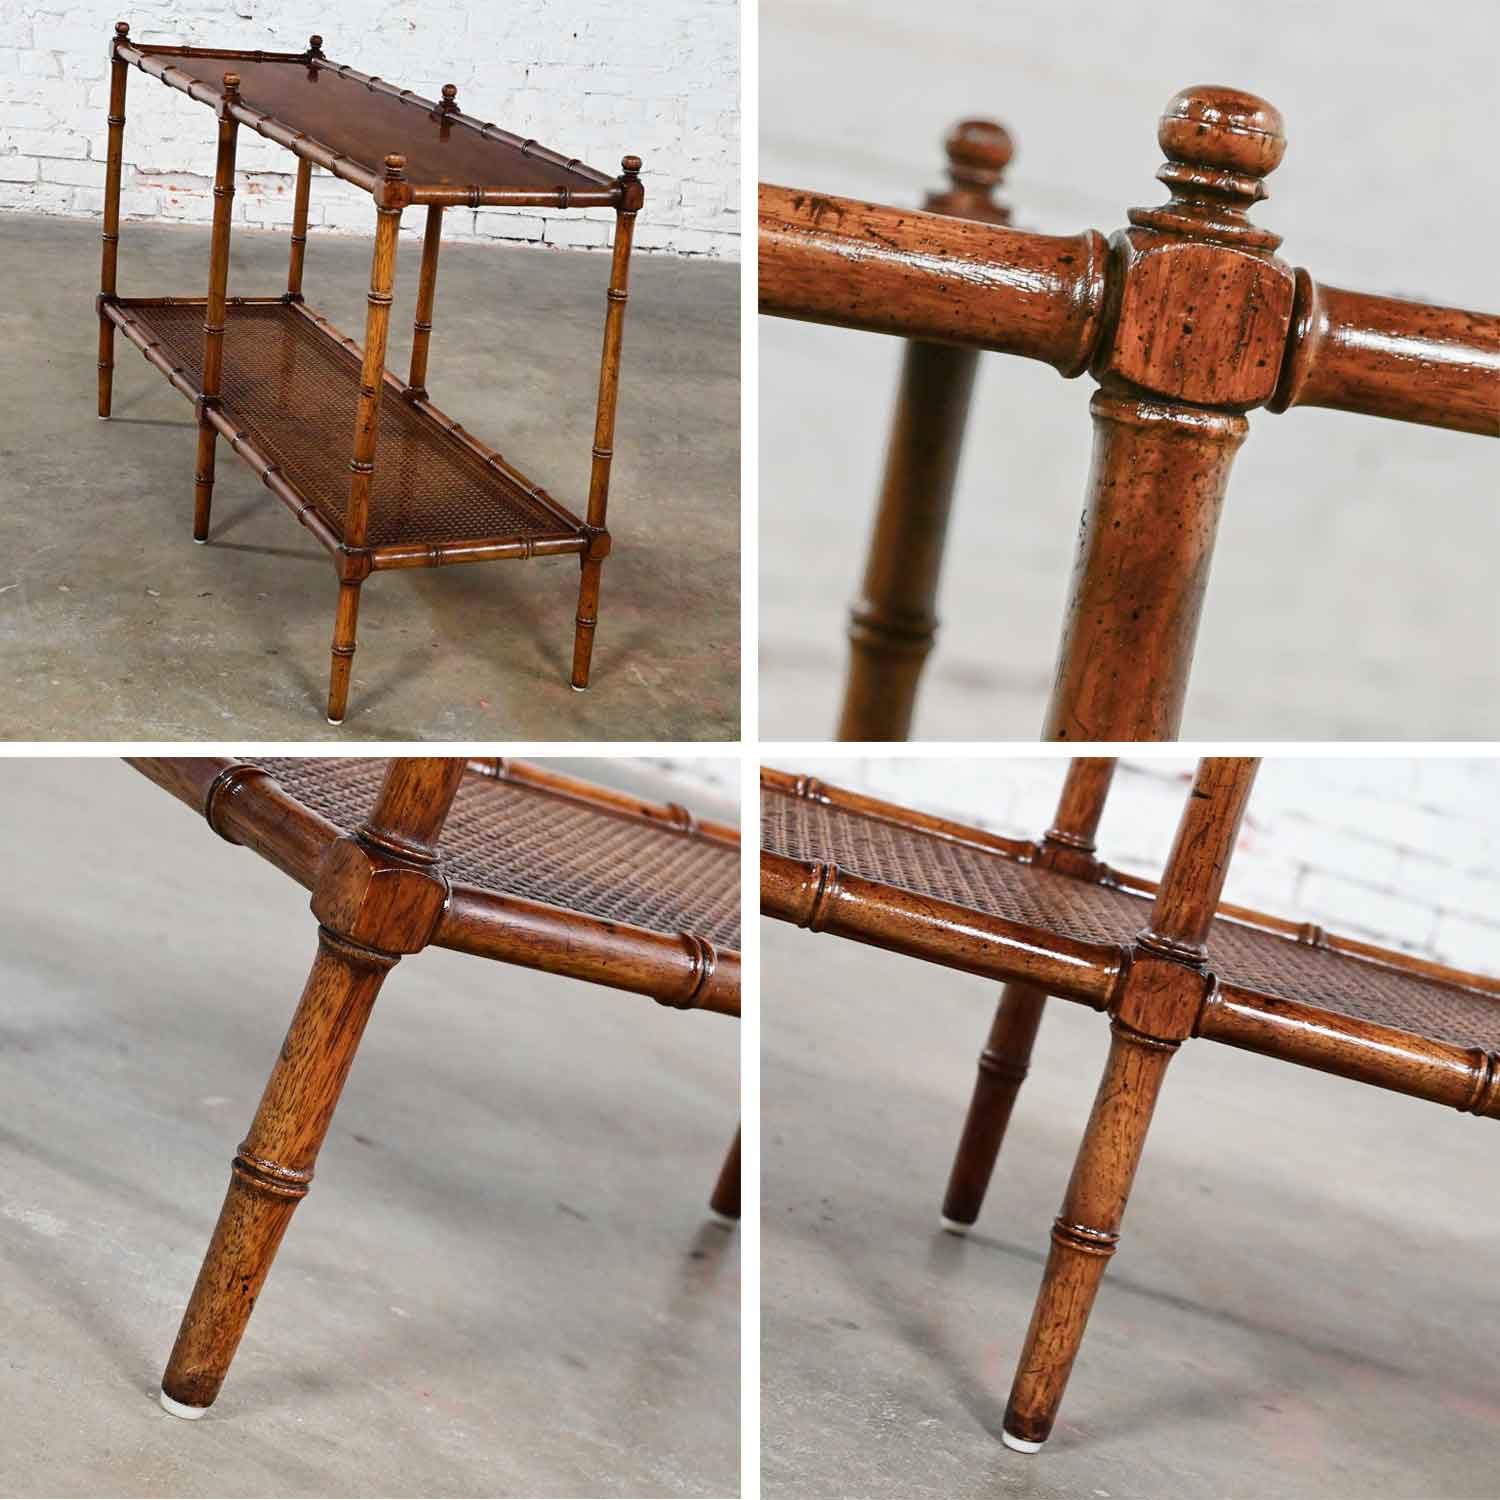 Late 20th Century Henredon Campaign Hollywood Regency Style Faux Bamboo & Cane Sofa Table